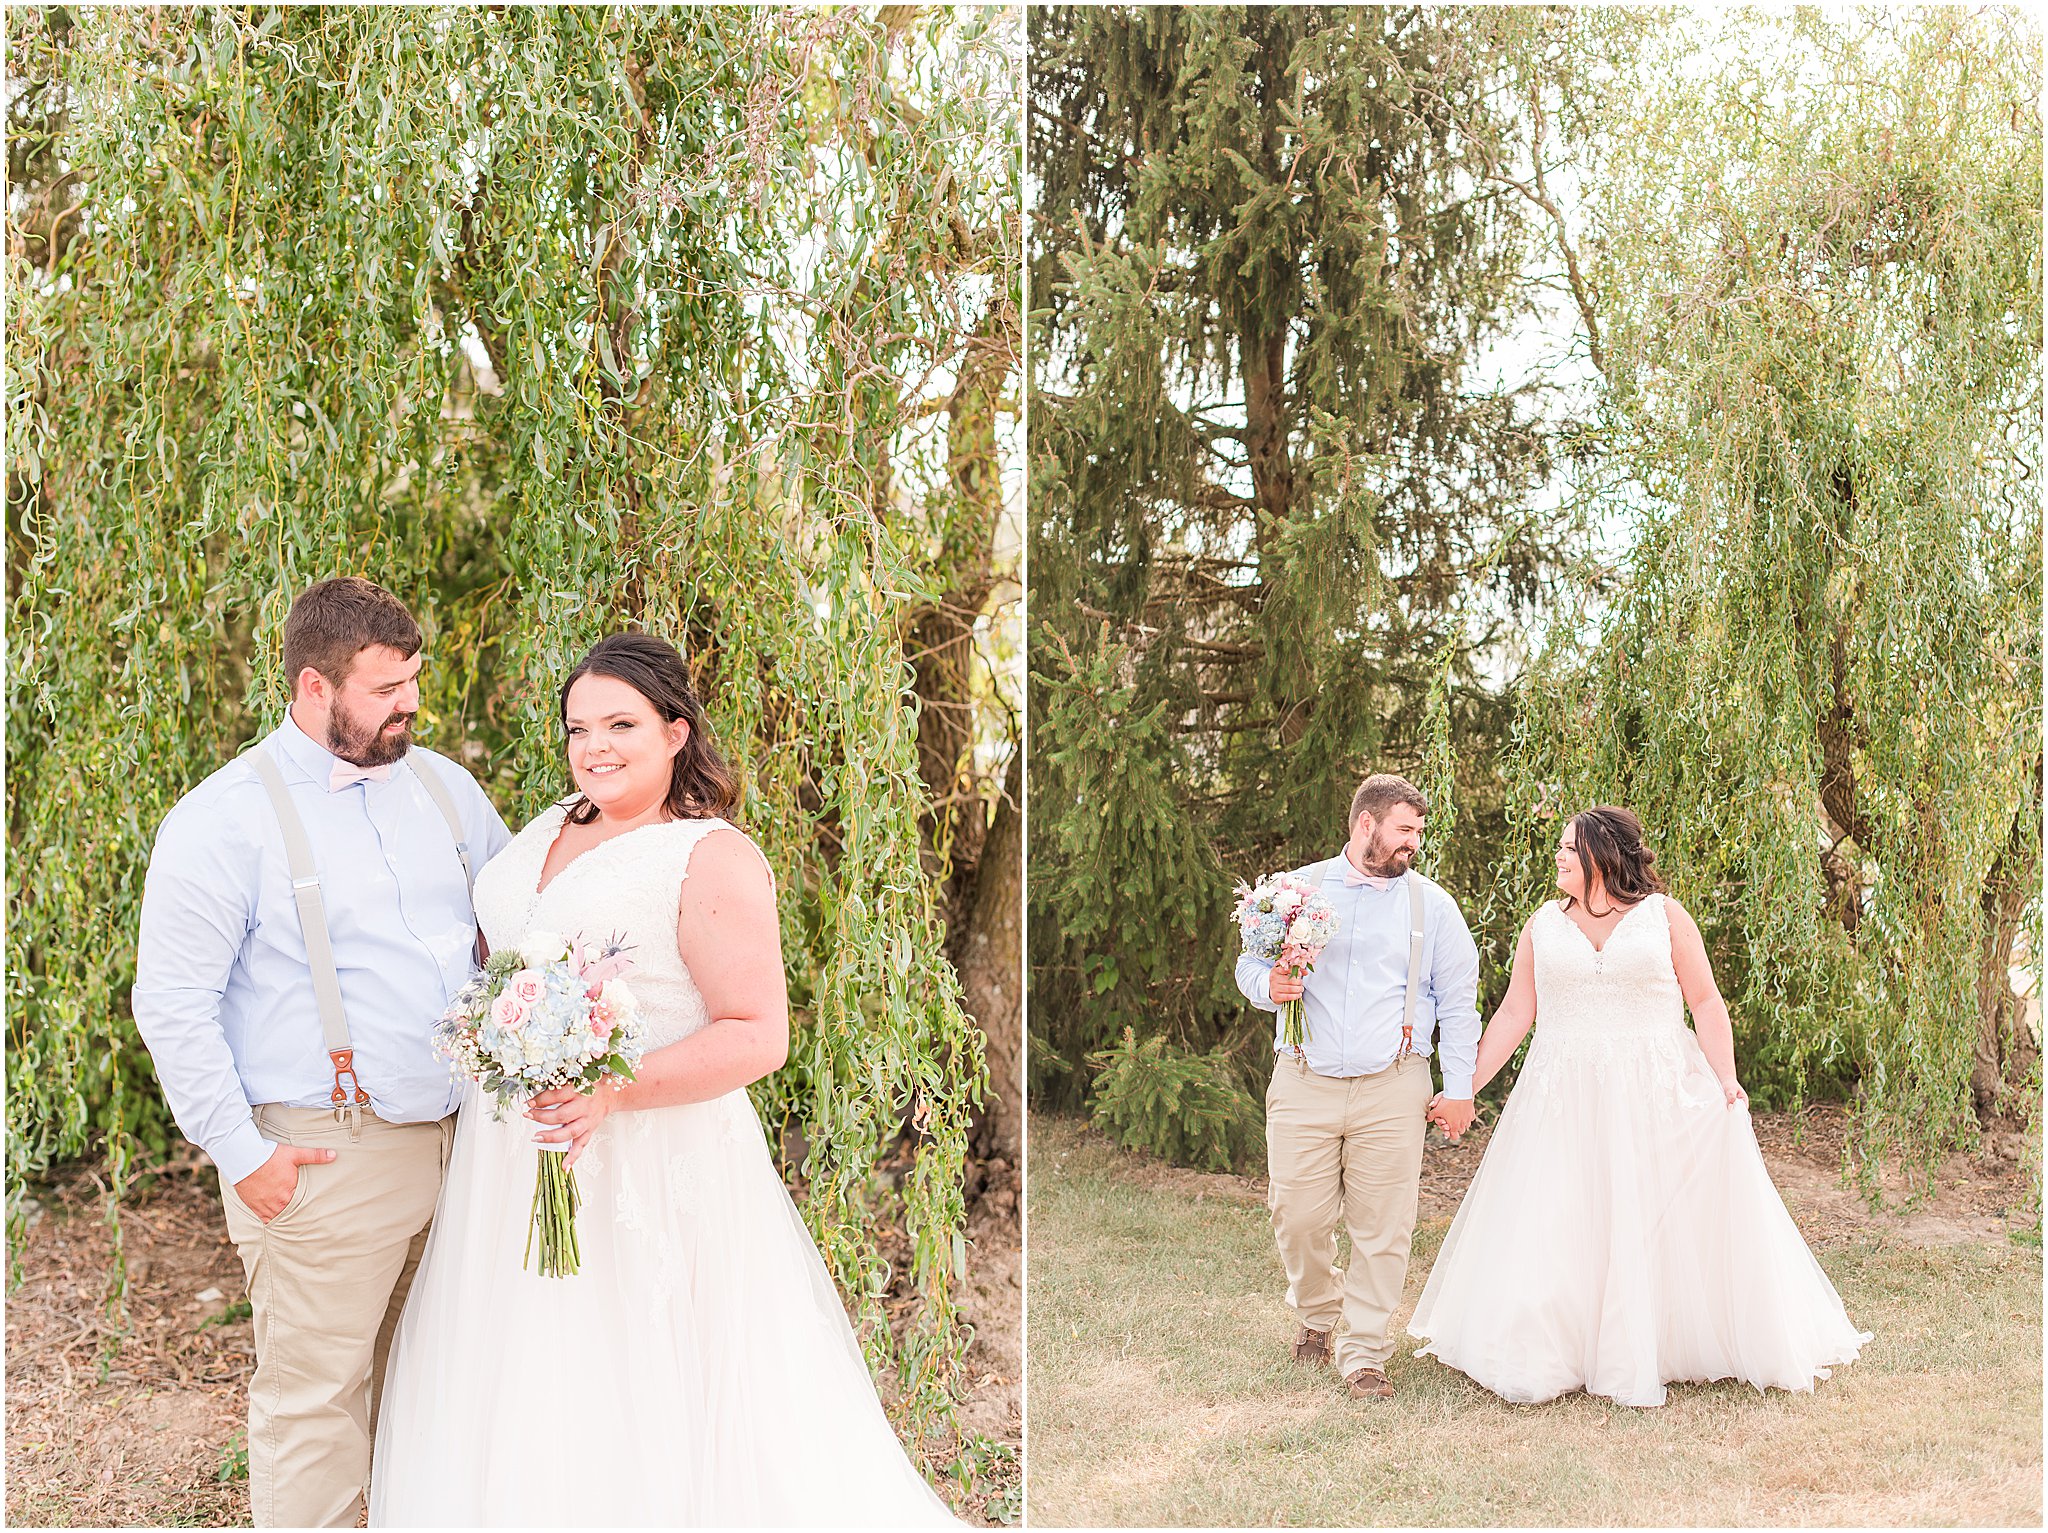 Bride and groom walking in front of willow tree at Cornerstone Hall in Salem, IN